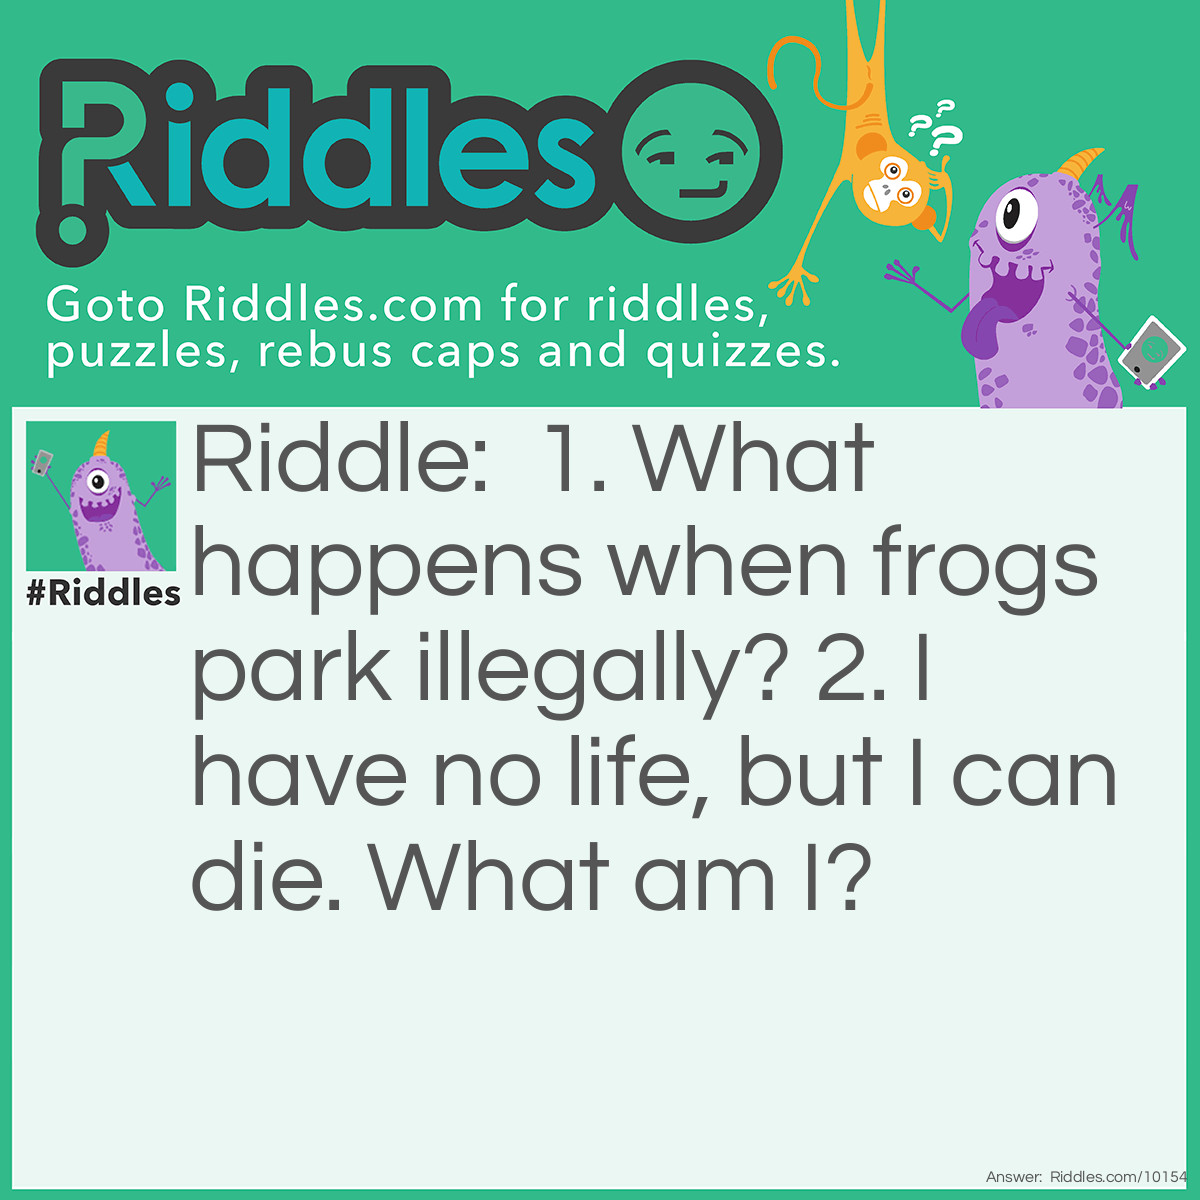 Riddle: 1. What happens when frogs park illegally? 2. I have no life, but I can die. What am I? Answer: 1. They get toad. 2. A battery.